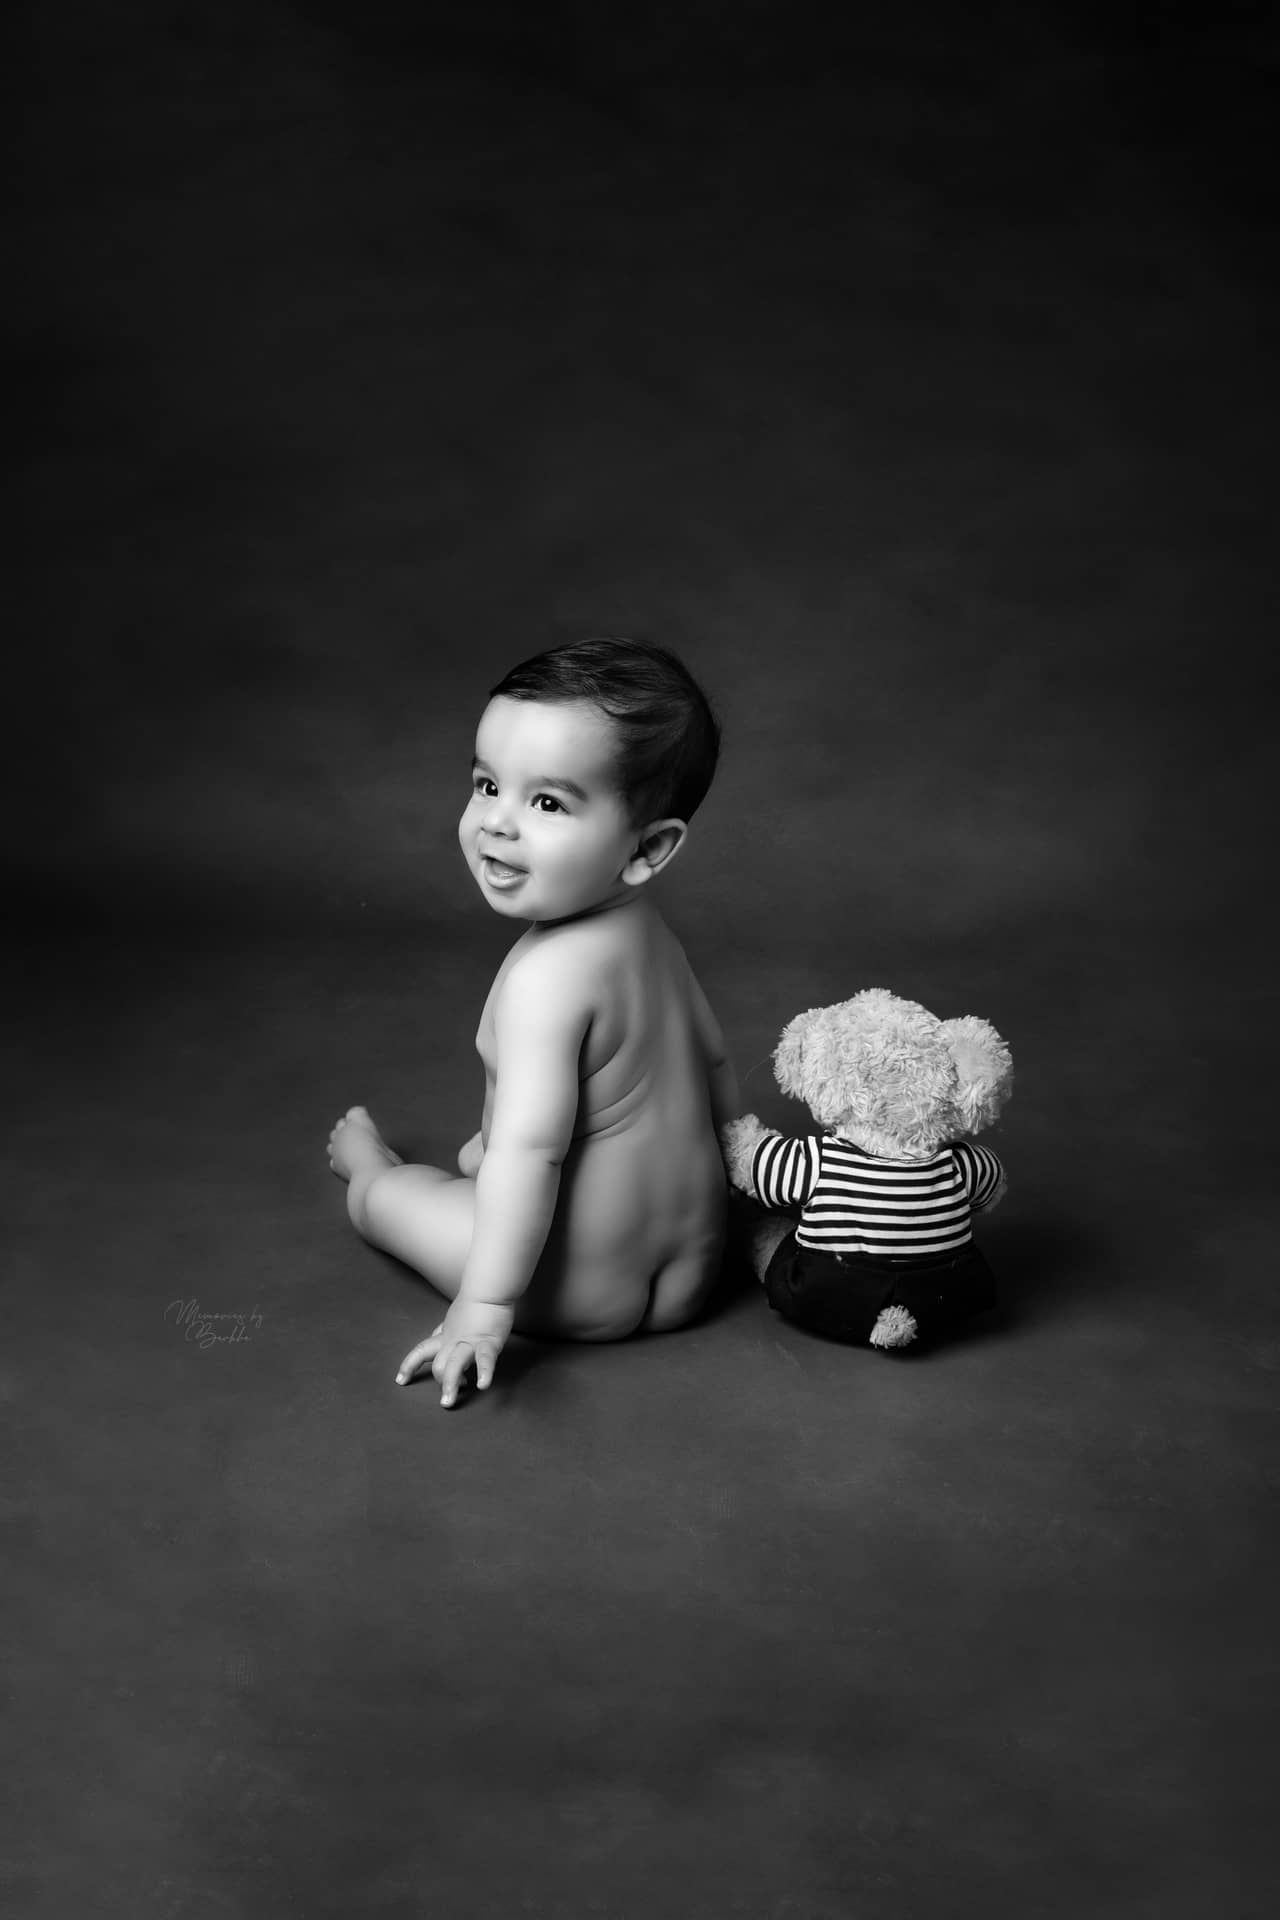 Newborn Photography Poses: 6 Simple and Easy for Beginners